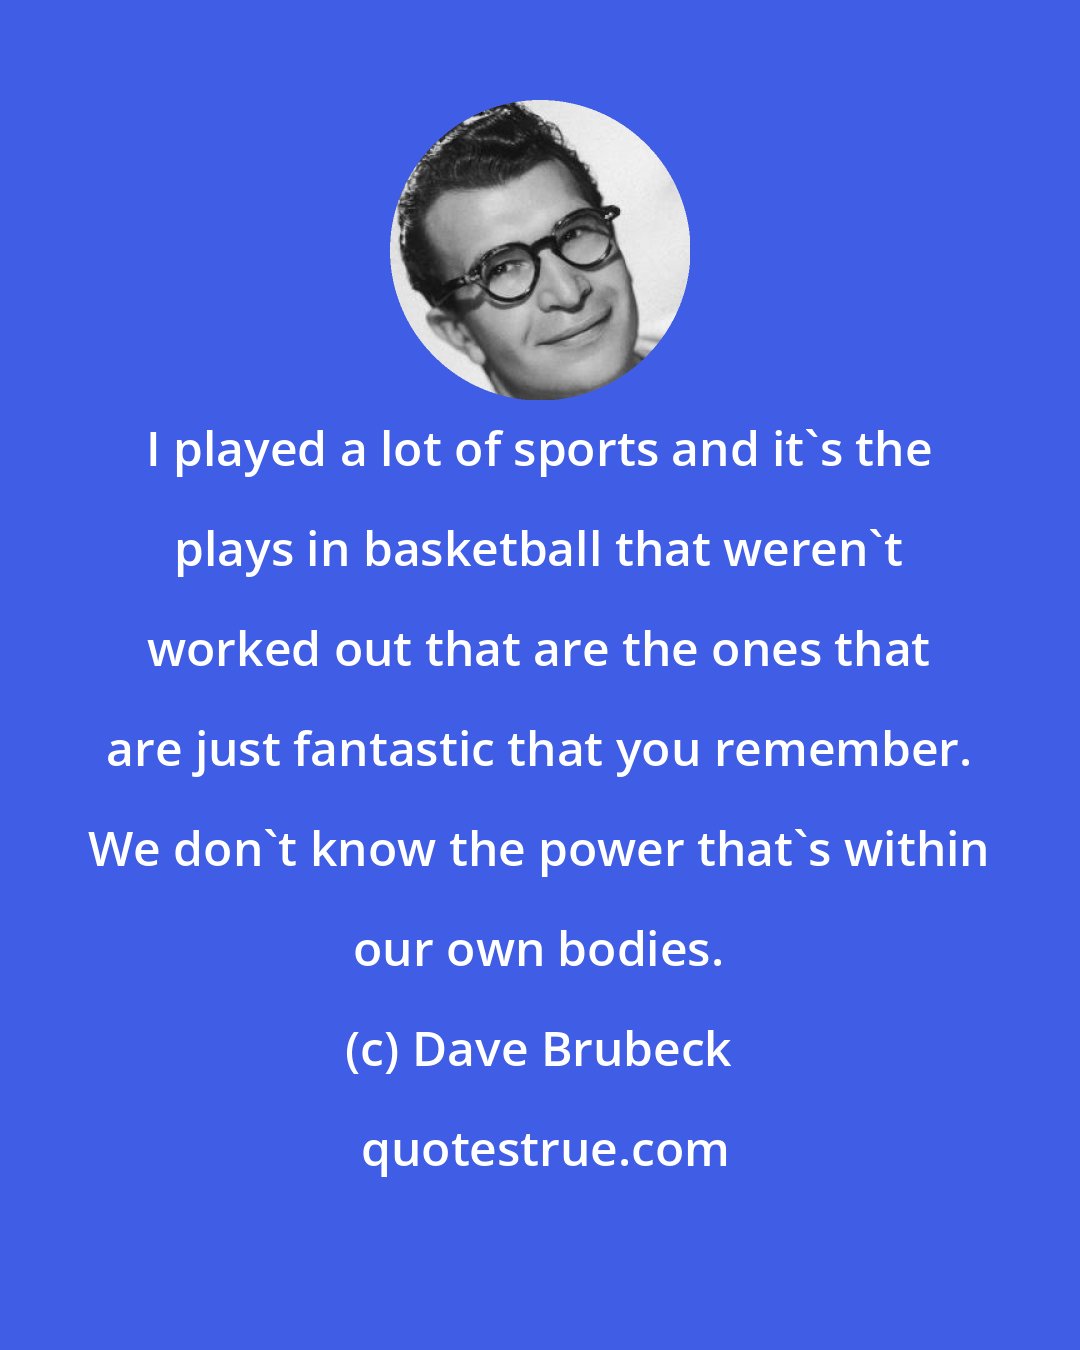 Dave Brubeck: I played a lot of sports and it's the plays in basketball that weren't worked out that are the ones that are just fantastic that you remember. We don't know the power that's within our own bodies.